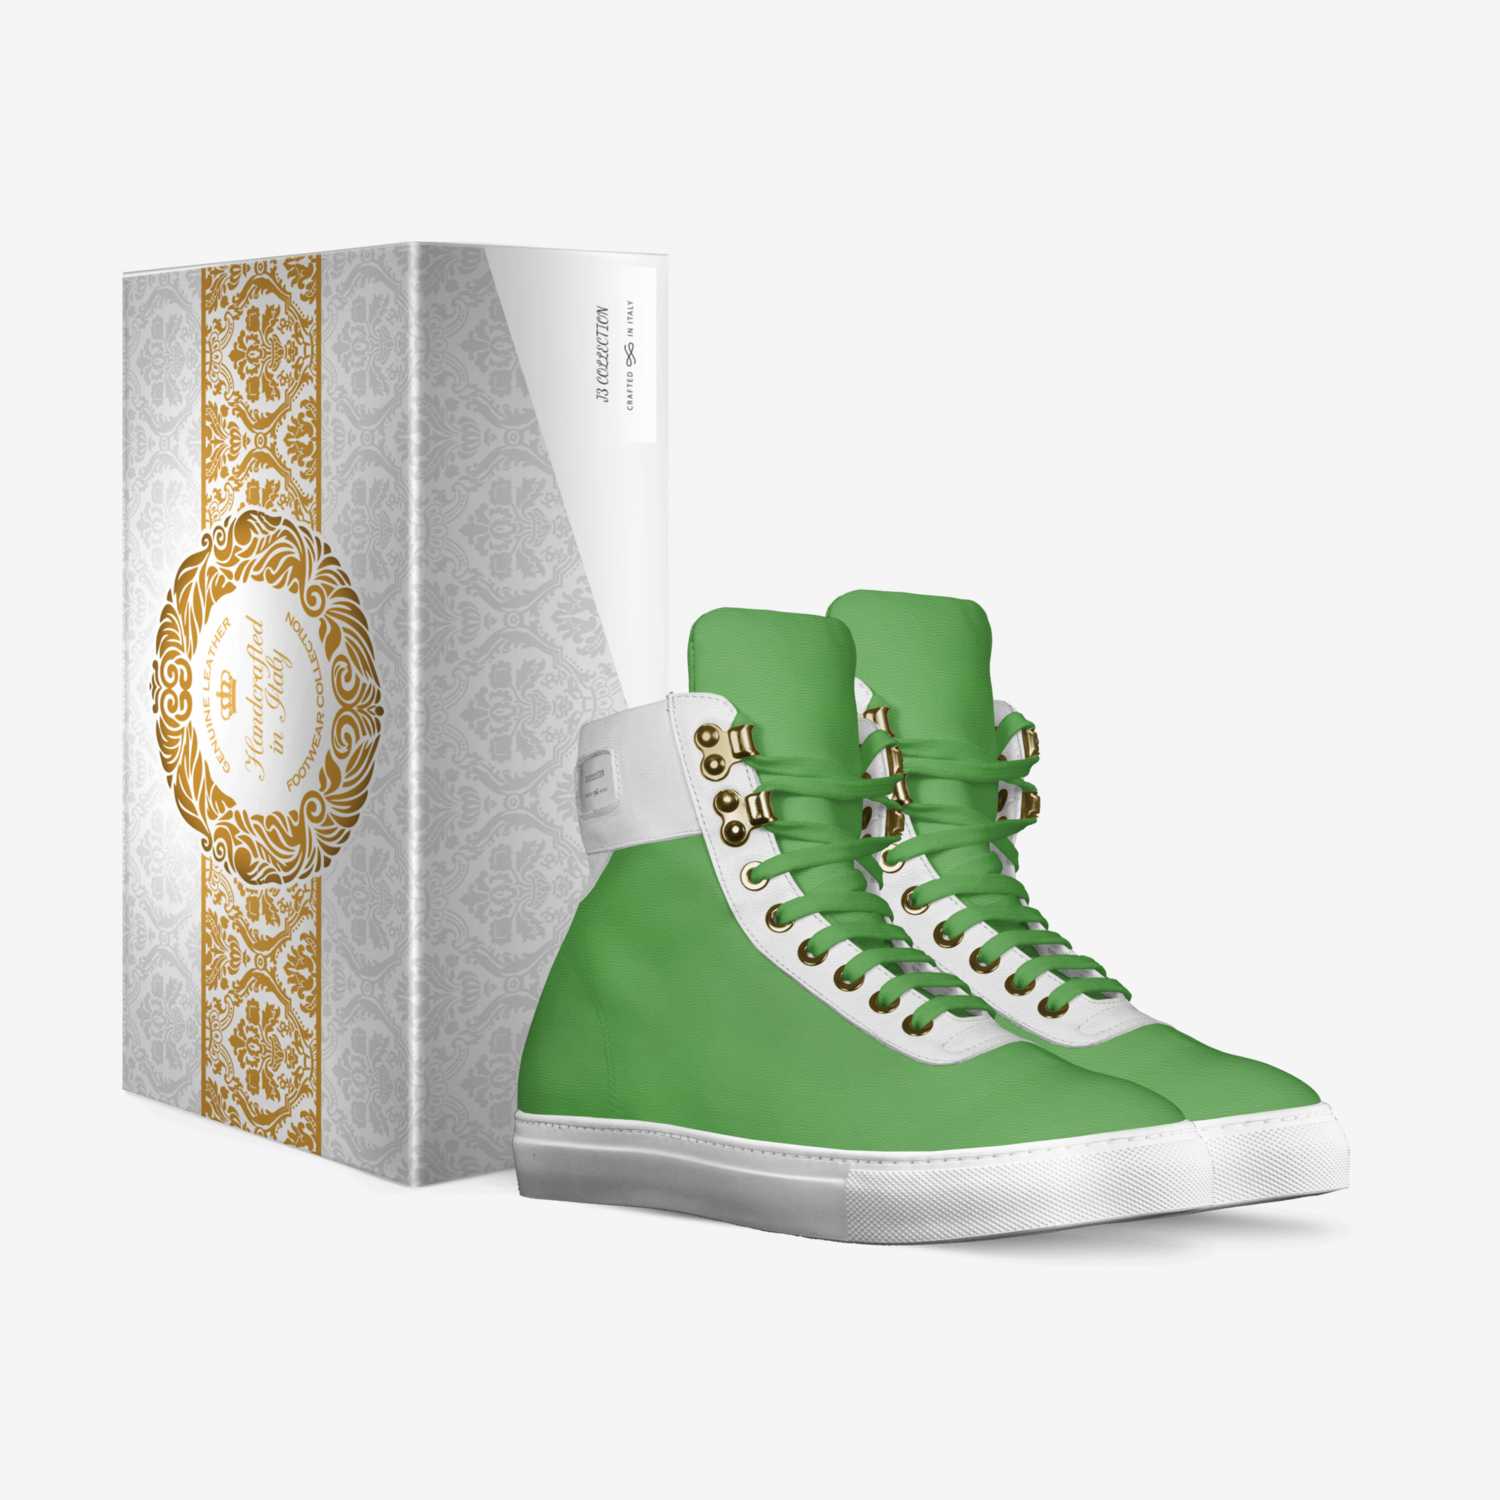 J3 COLLECTION custom made in Italy shoes by Stephanie Jordan | Box view